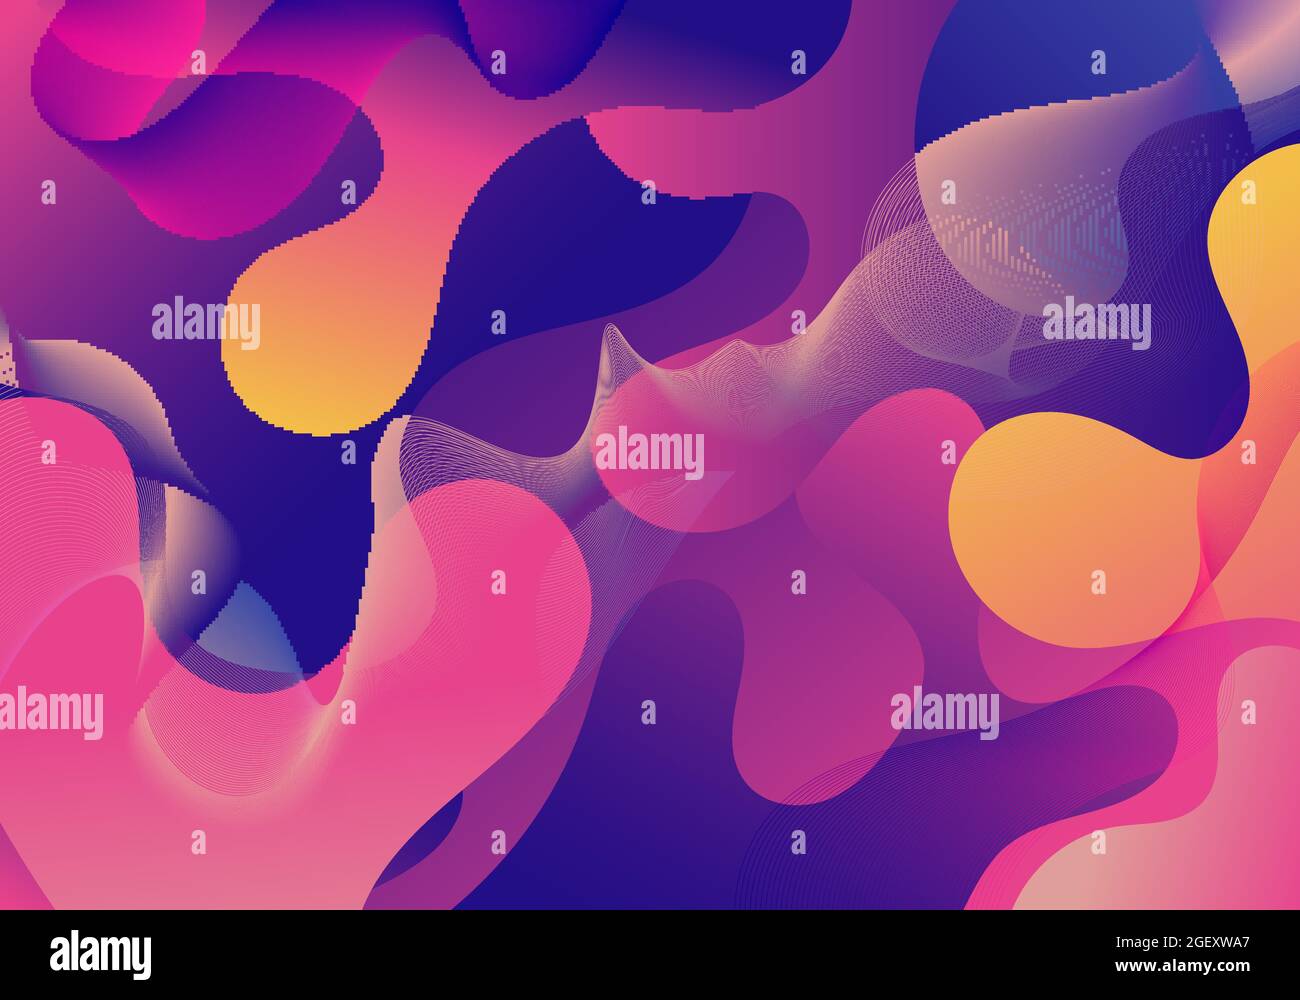 Abstract fluid or liquid gradient shape vibrant color background. Vector illustration Stock Vector